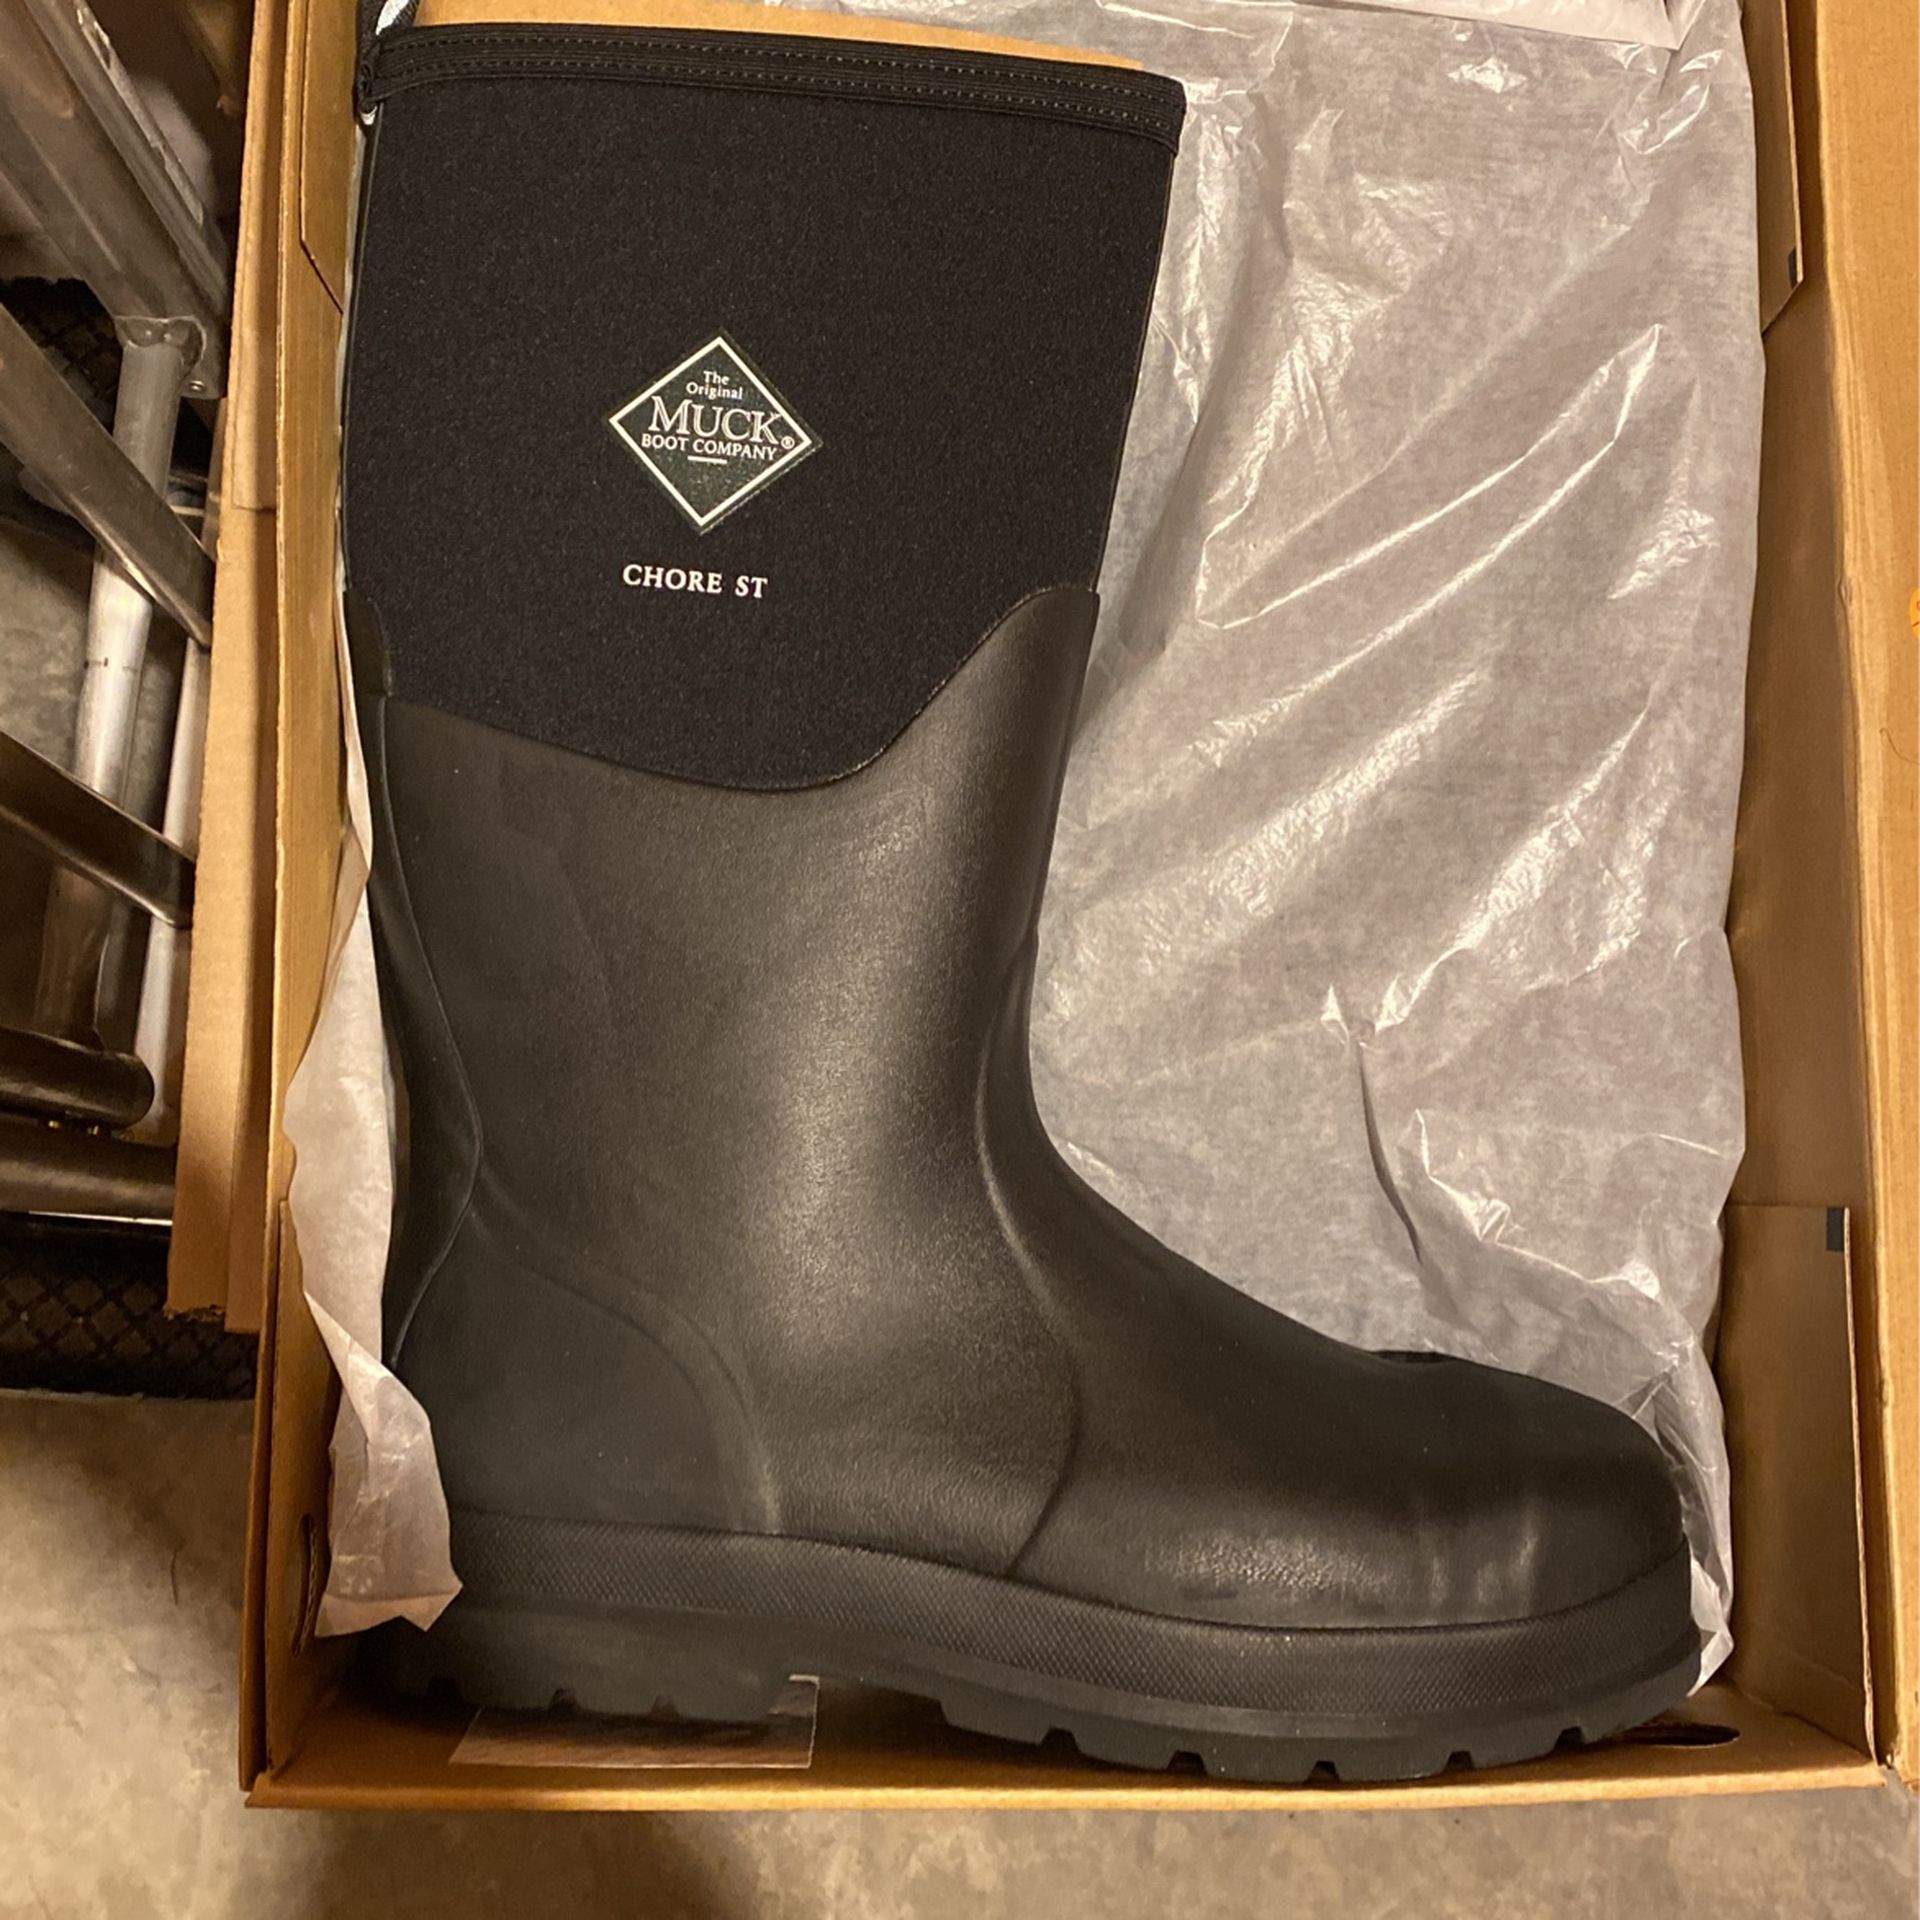 Muck boots Size 13